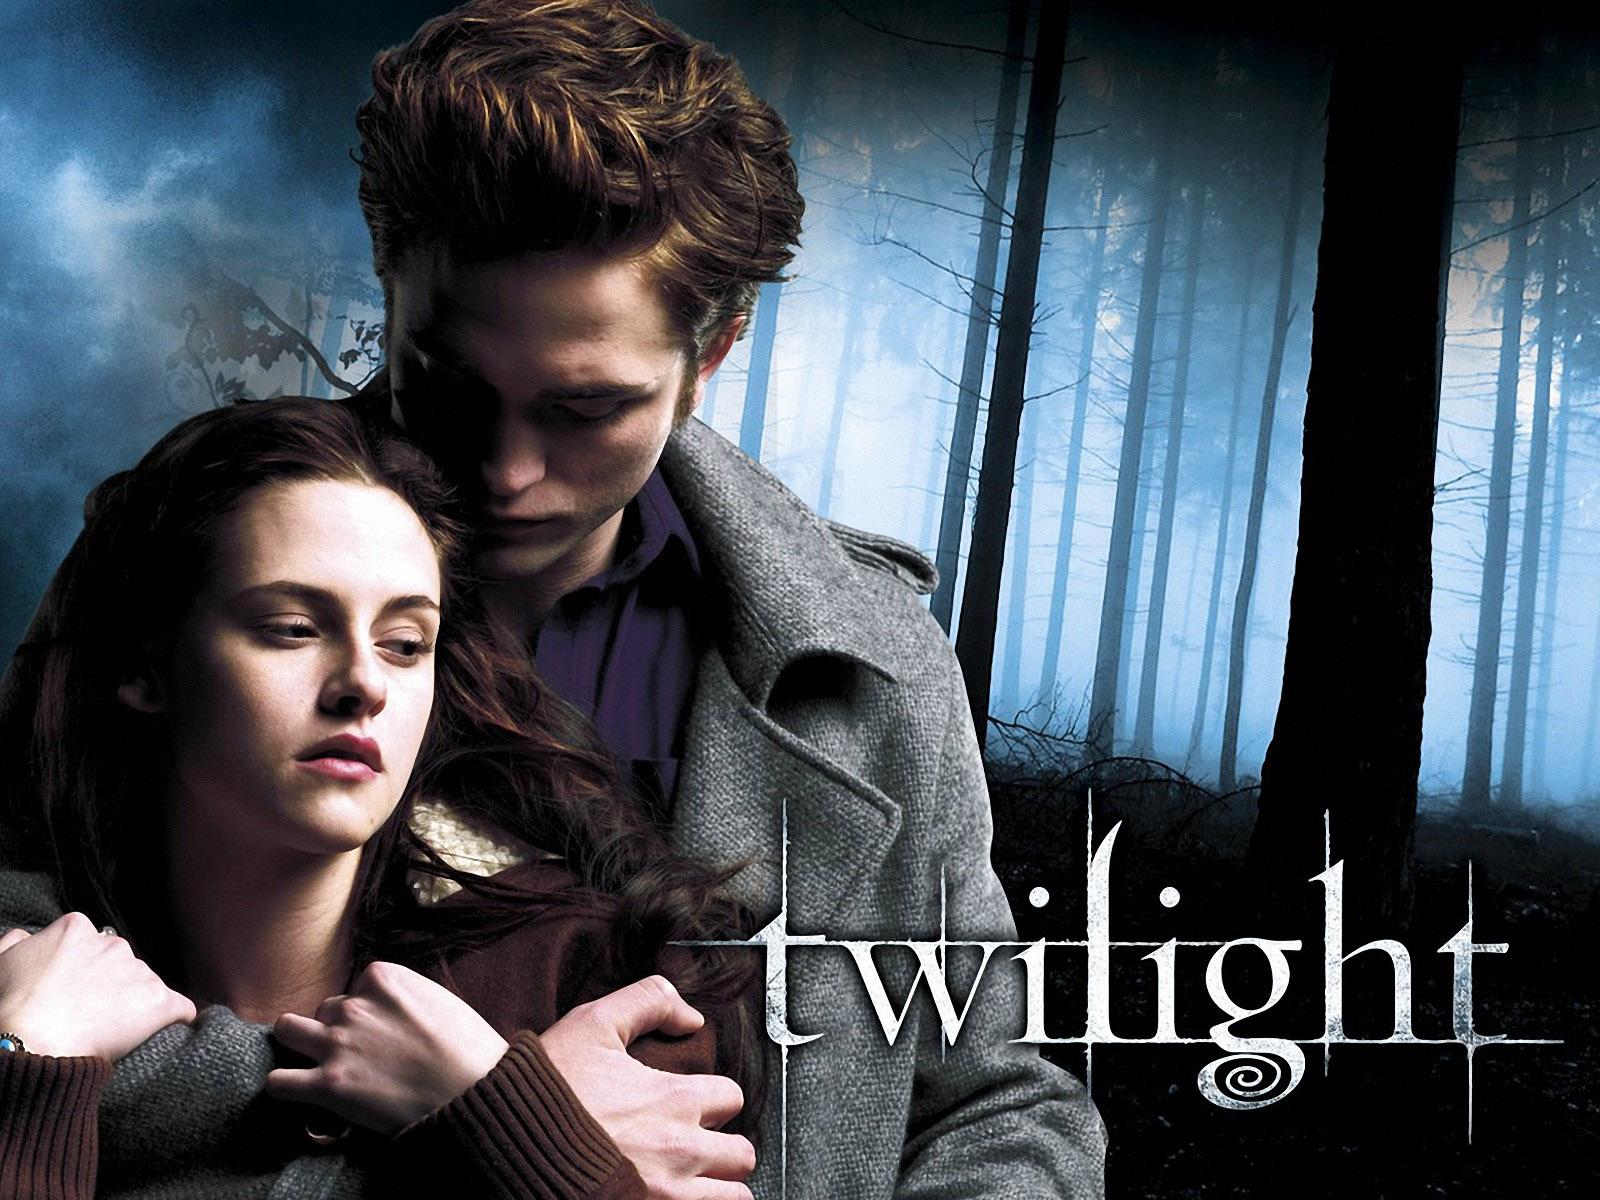 Twilight hd wallpapers group